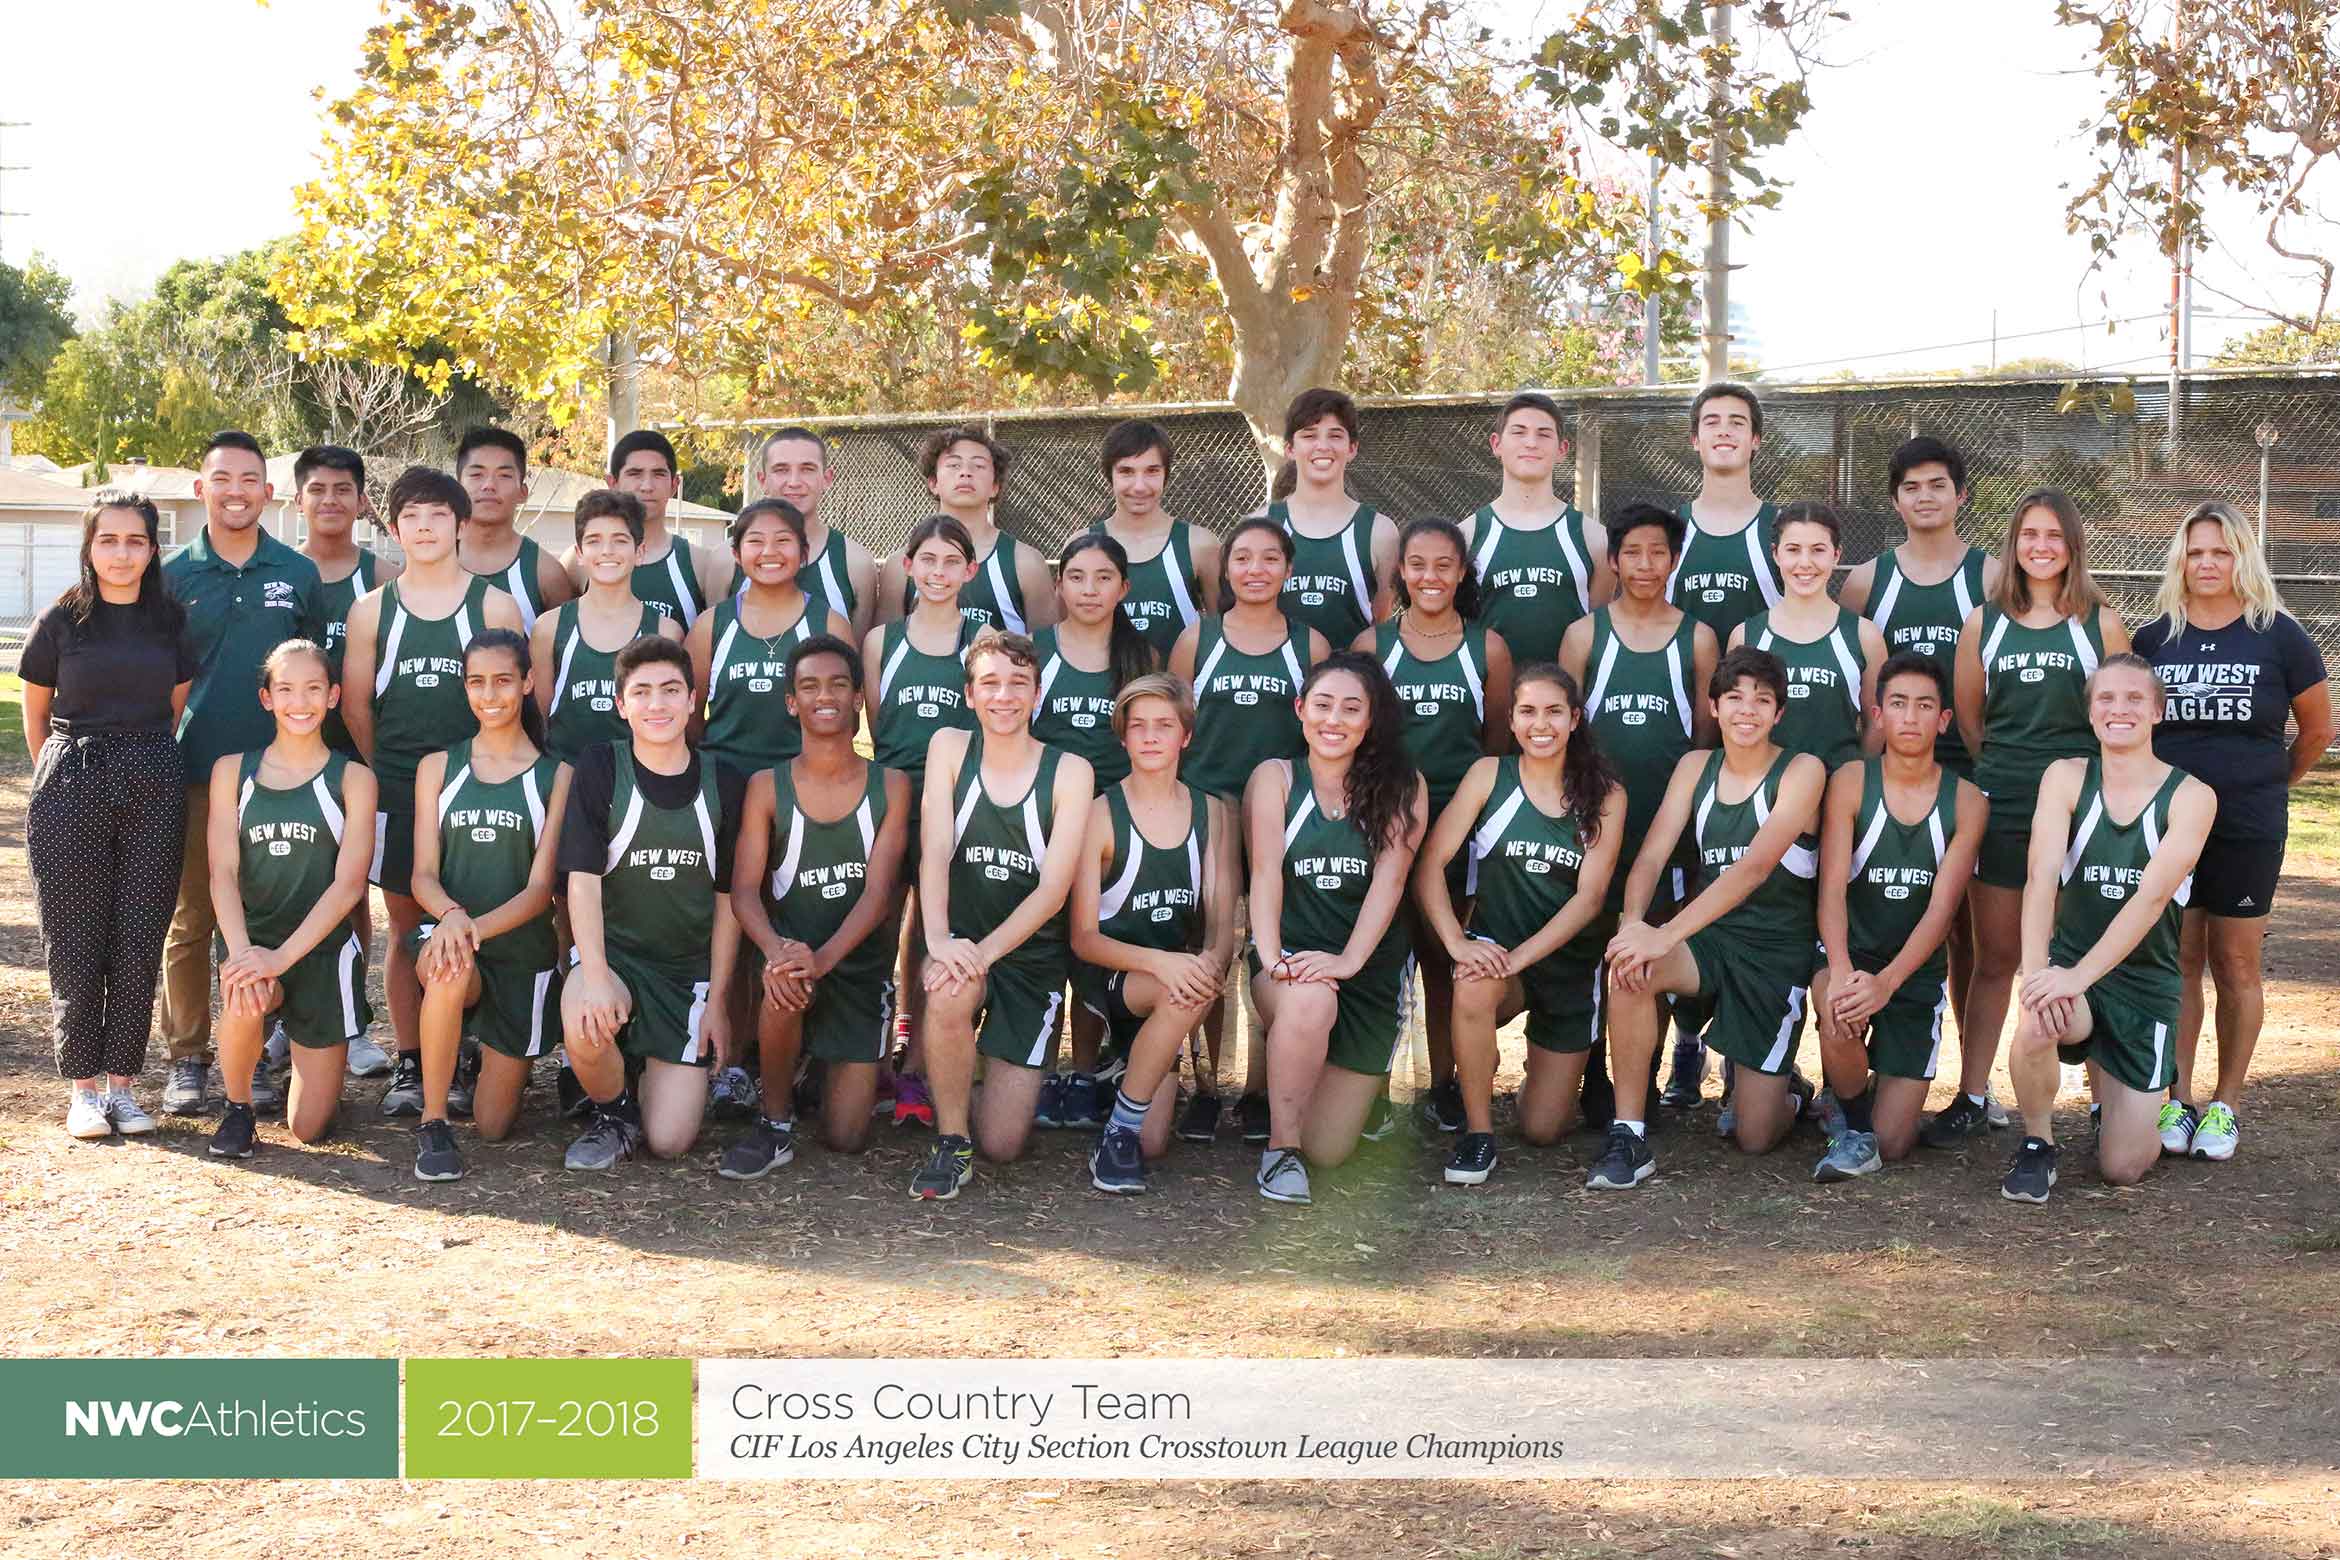 2017-2018 New West Charter Eagles Cross Country Team